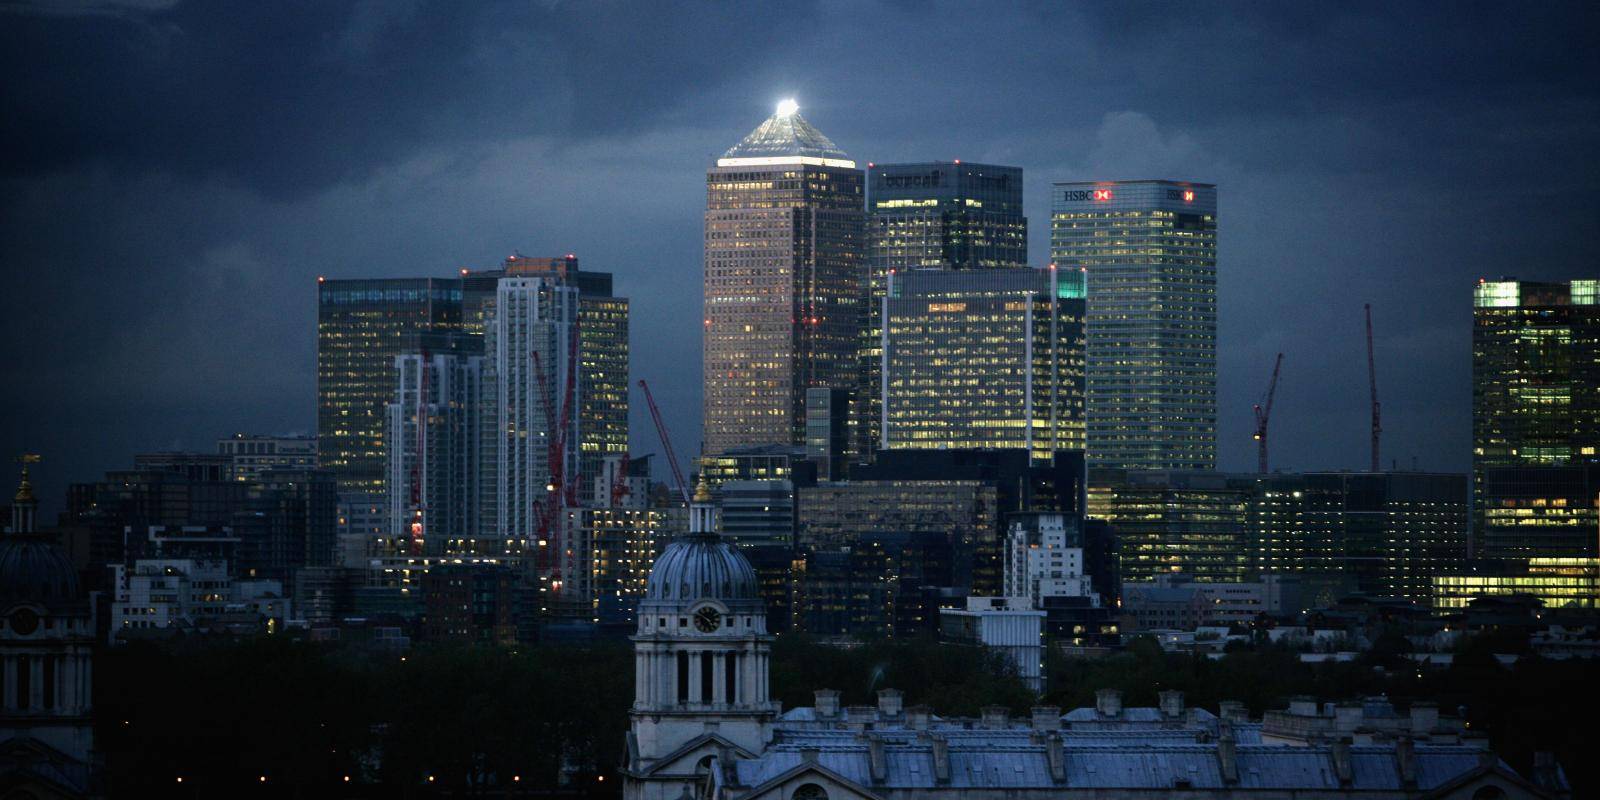 Dark clouds gather over the Canary Wharf business district of London, UK